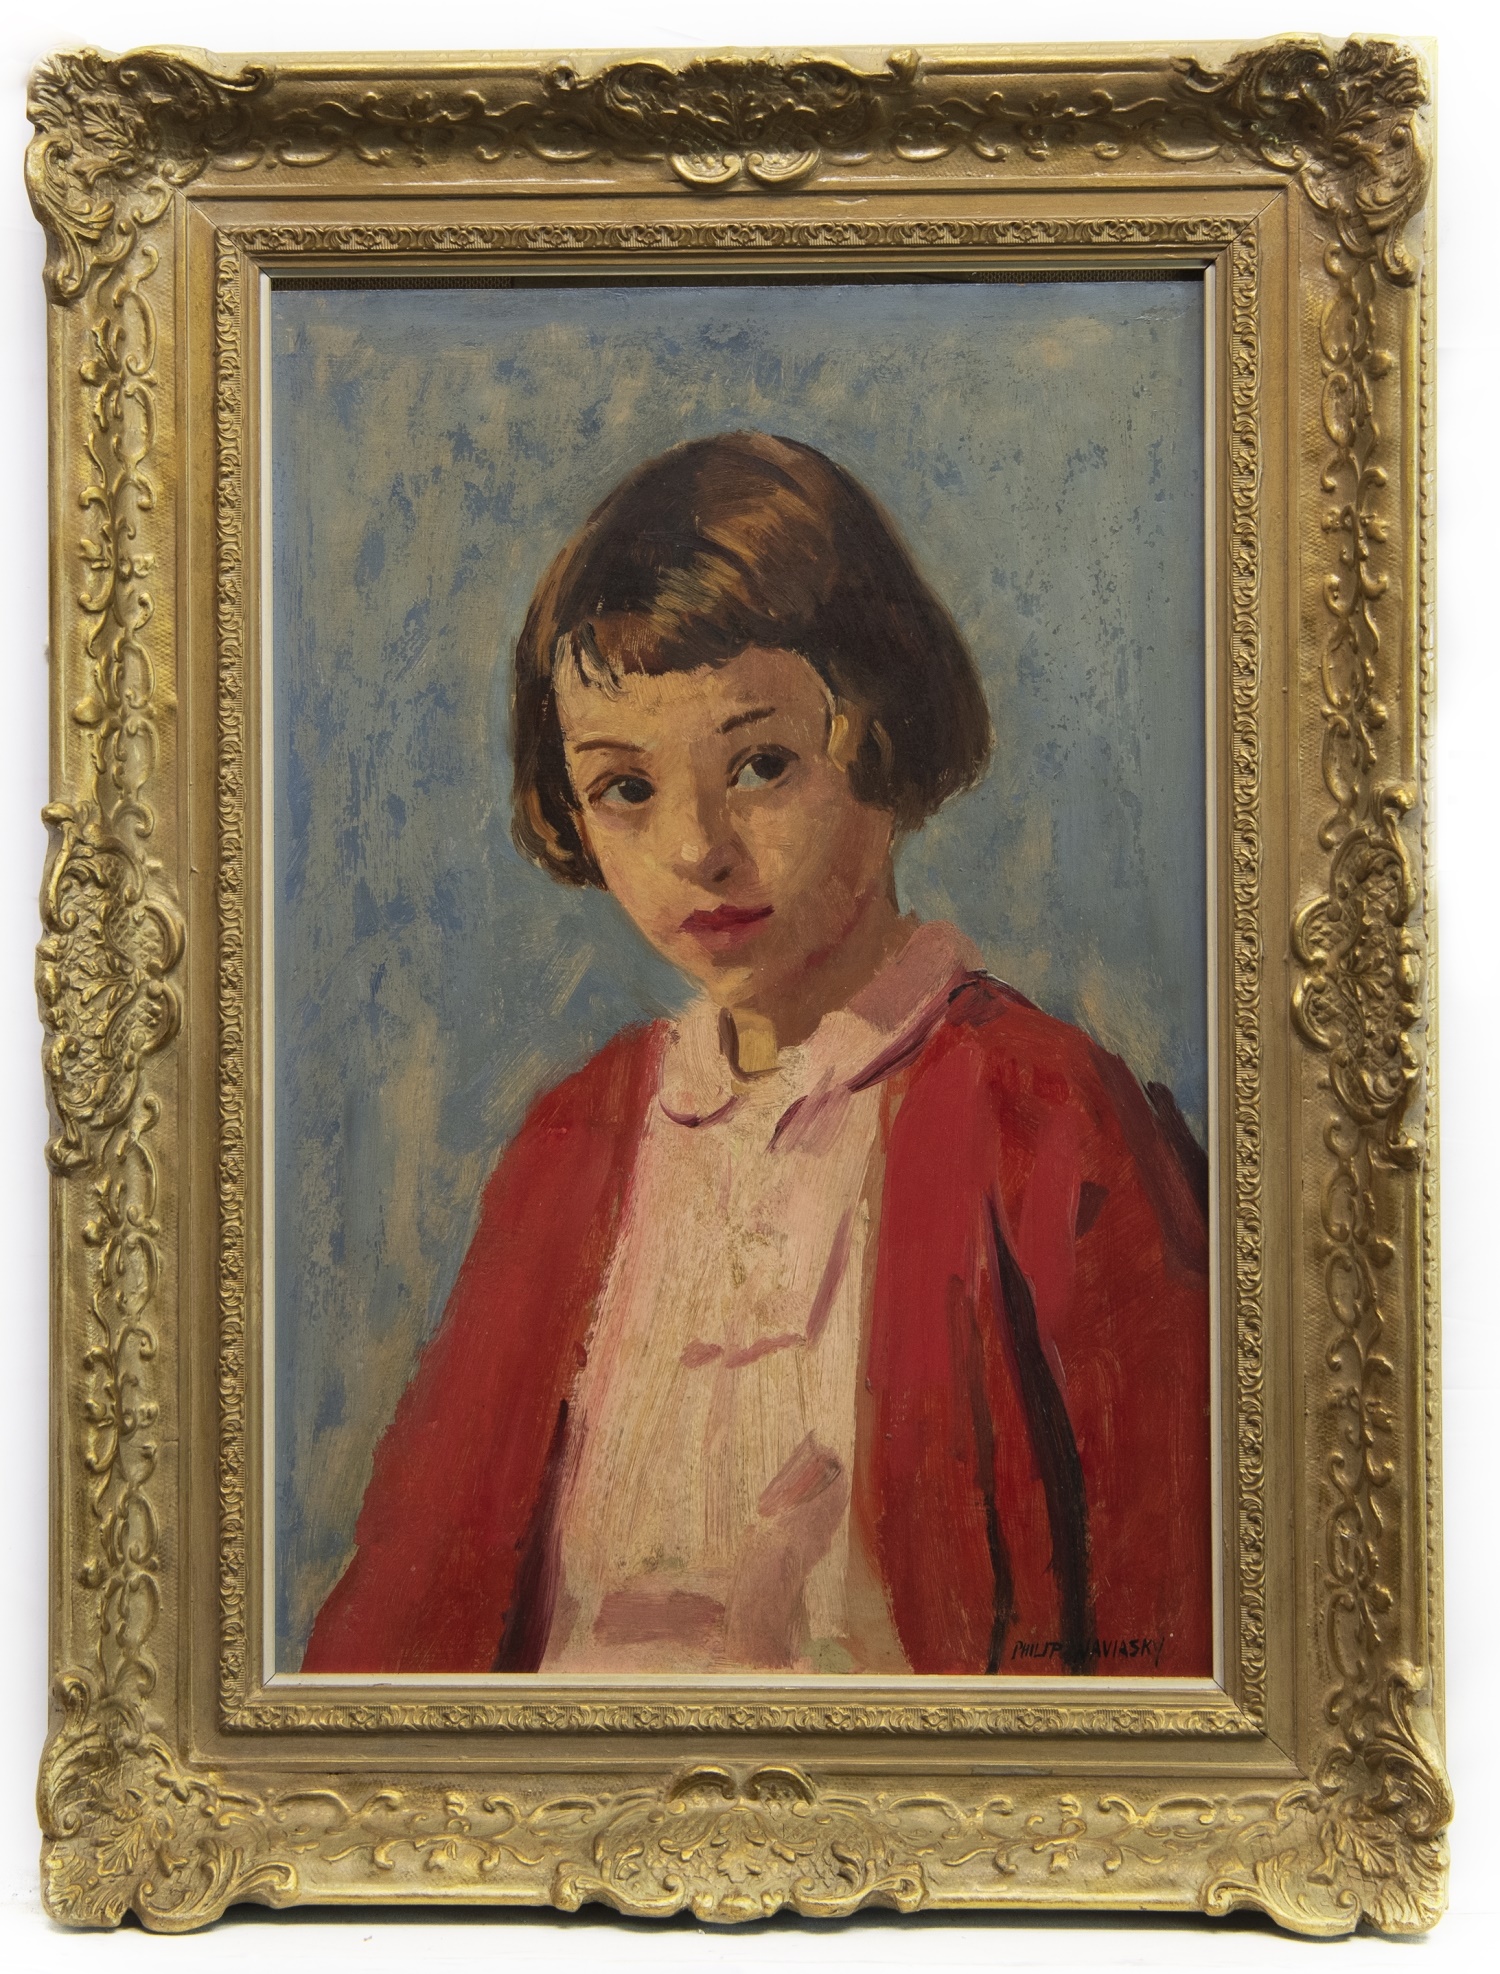 GIRL IN RED, AN OIL BY PHILIP NAVIASKY